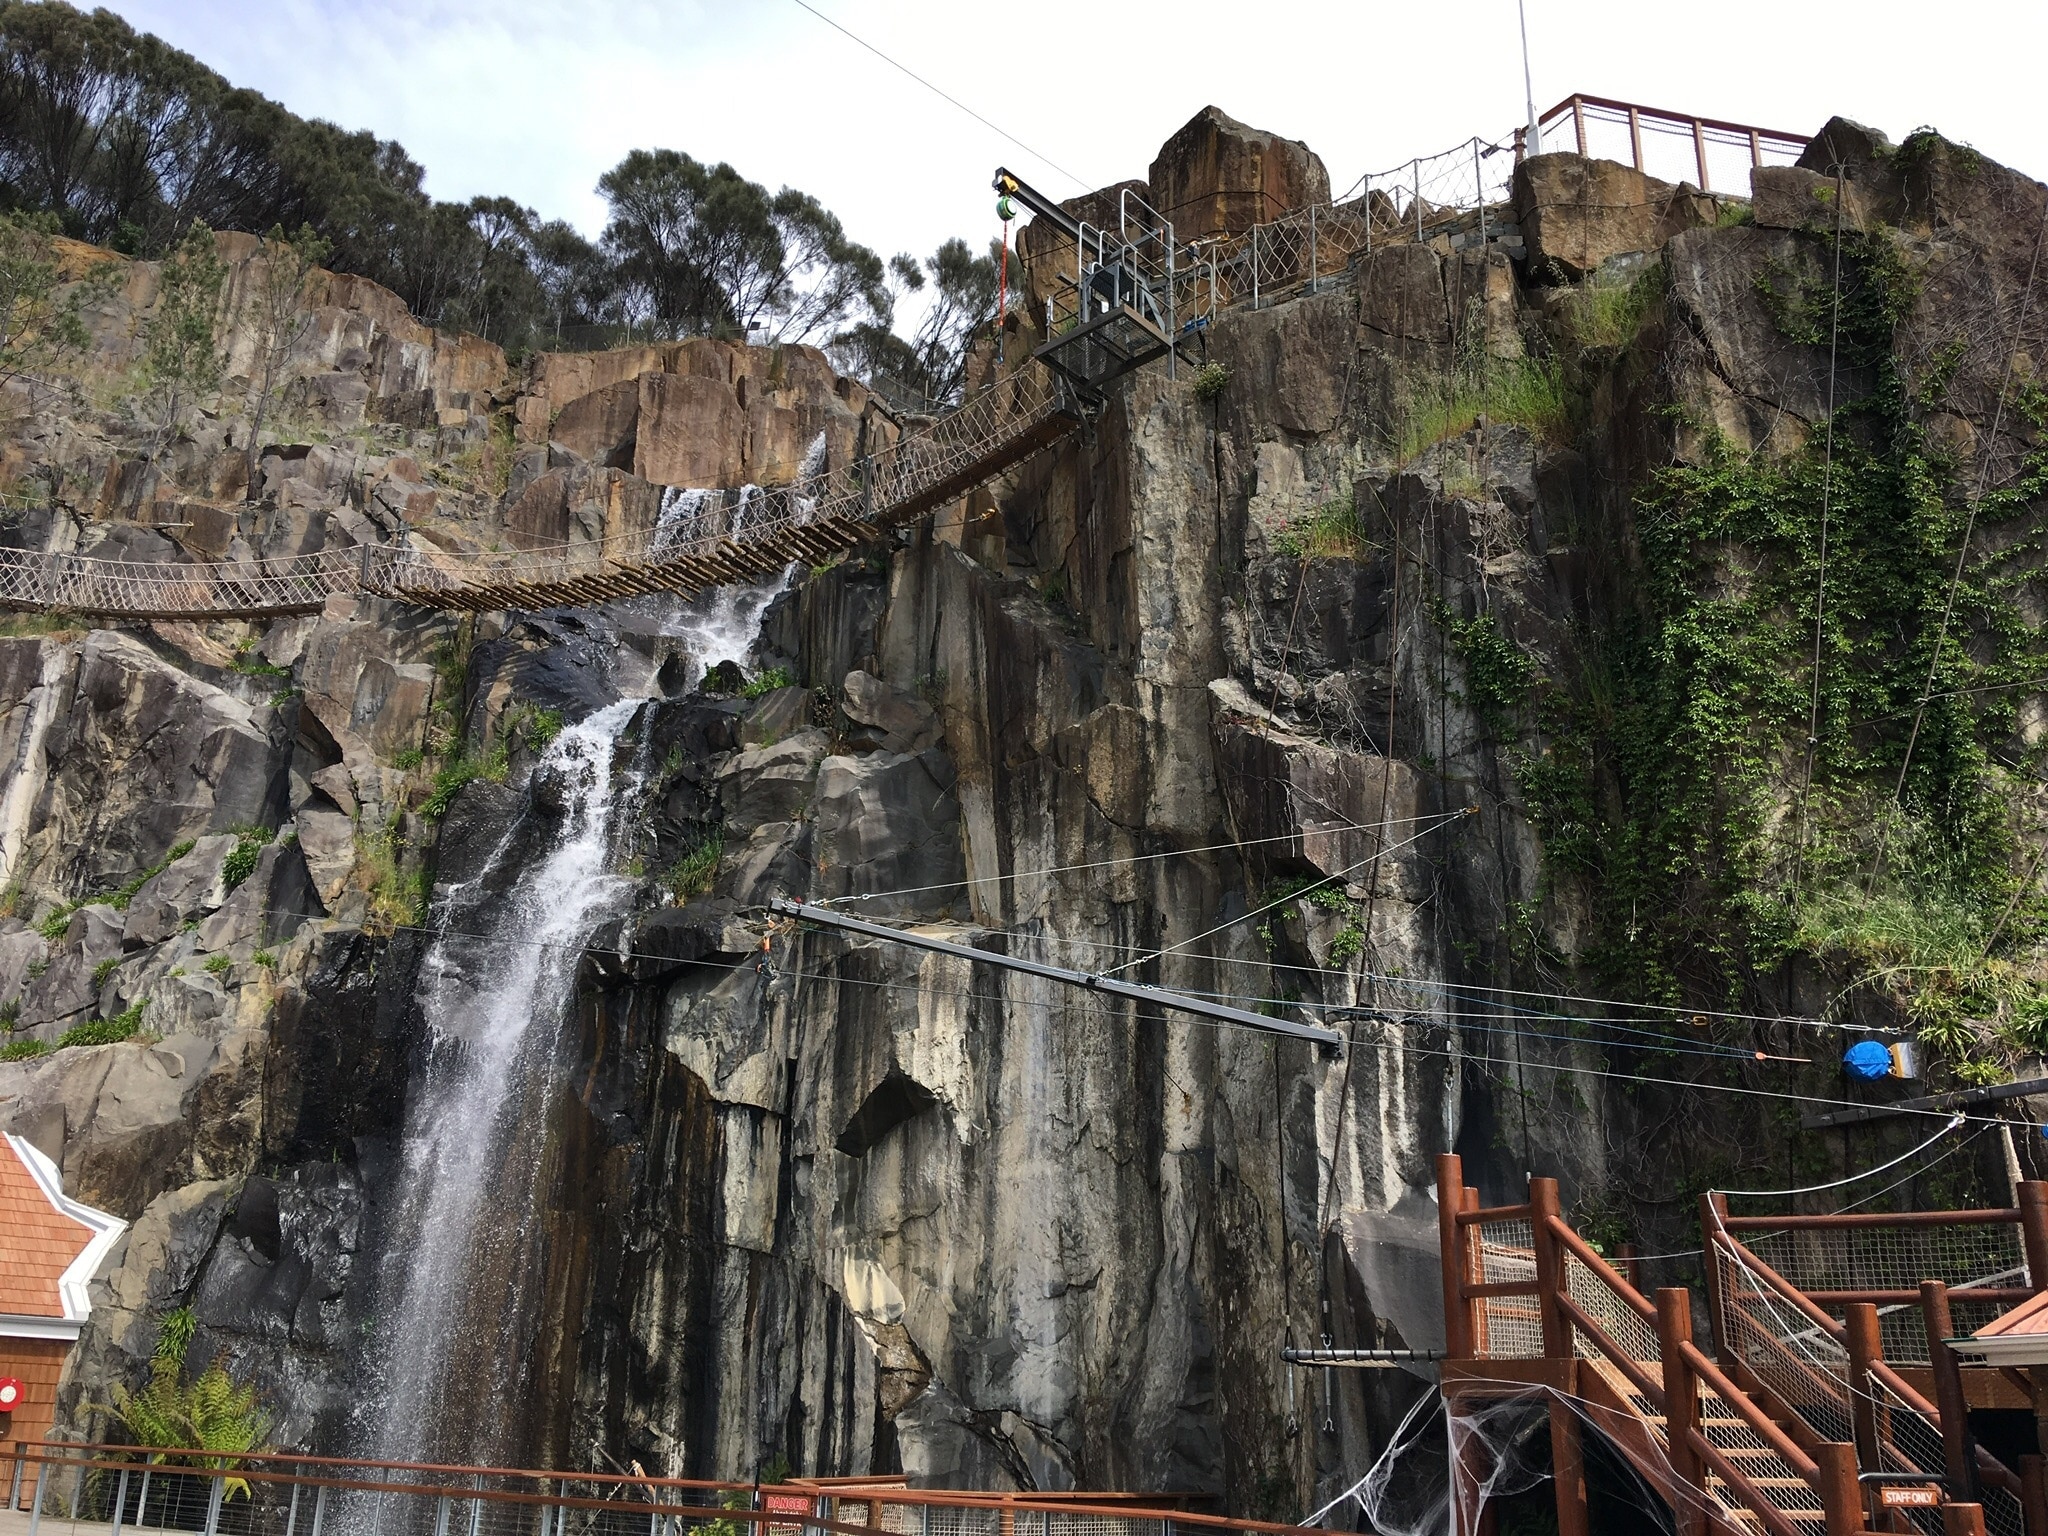 Awesome rock climbing and adventure park in the heart of Launceston 
#lifeatexpedia